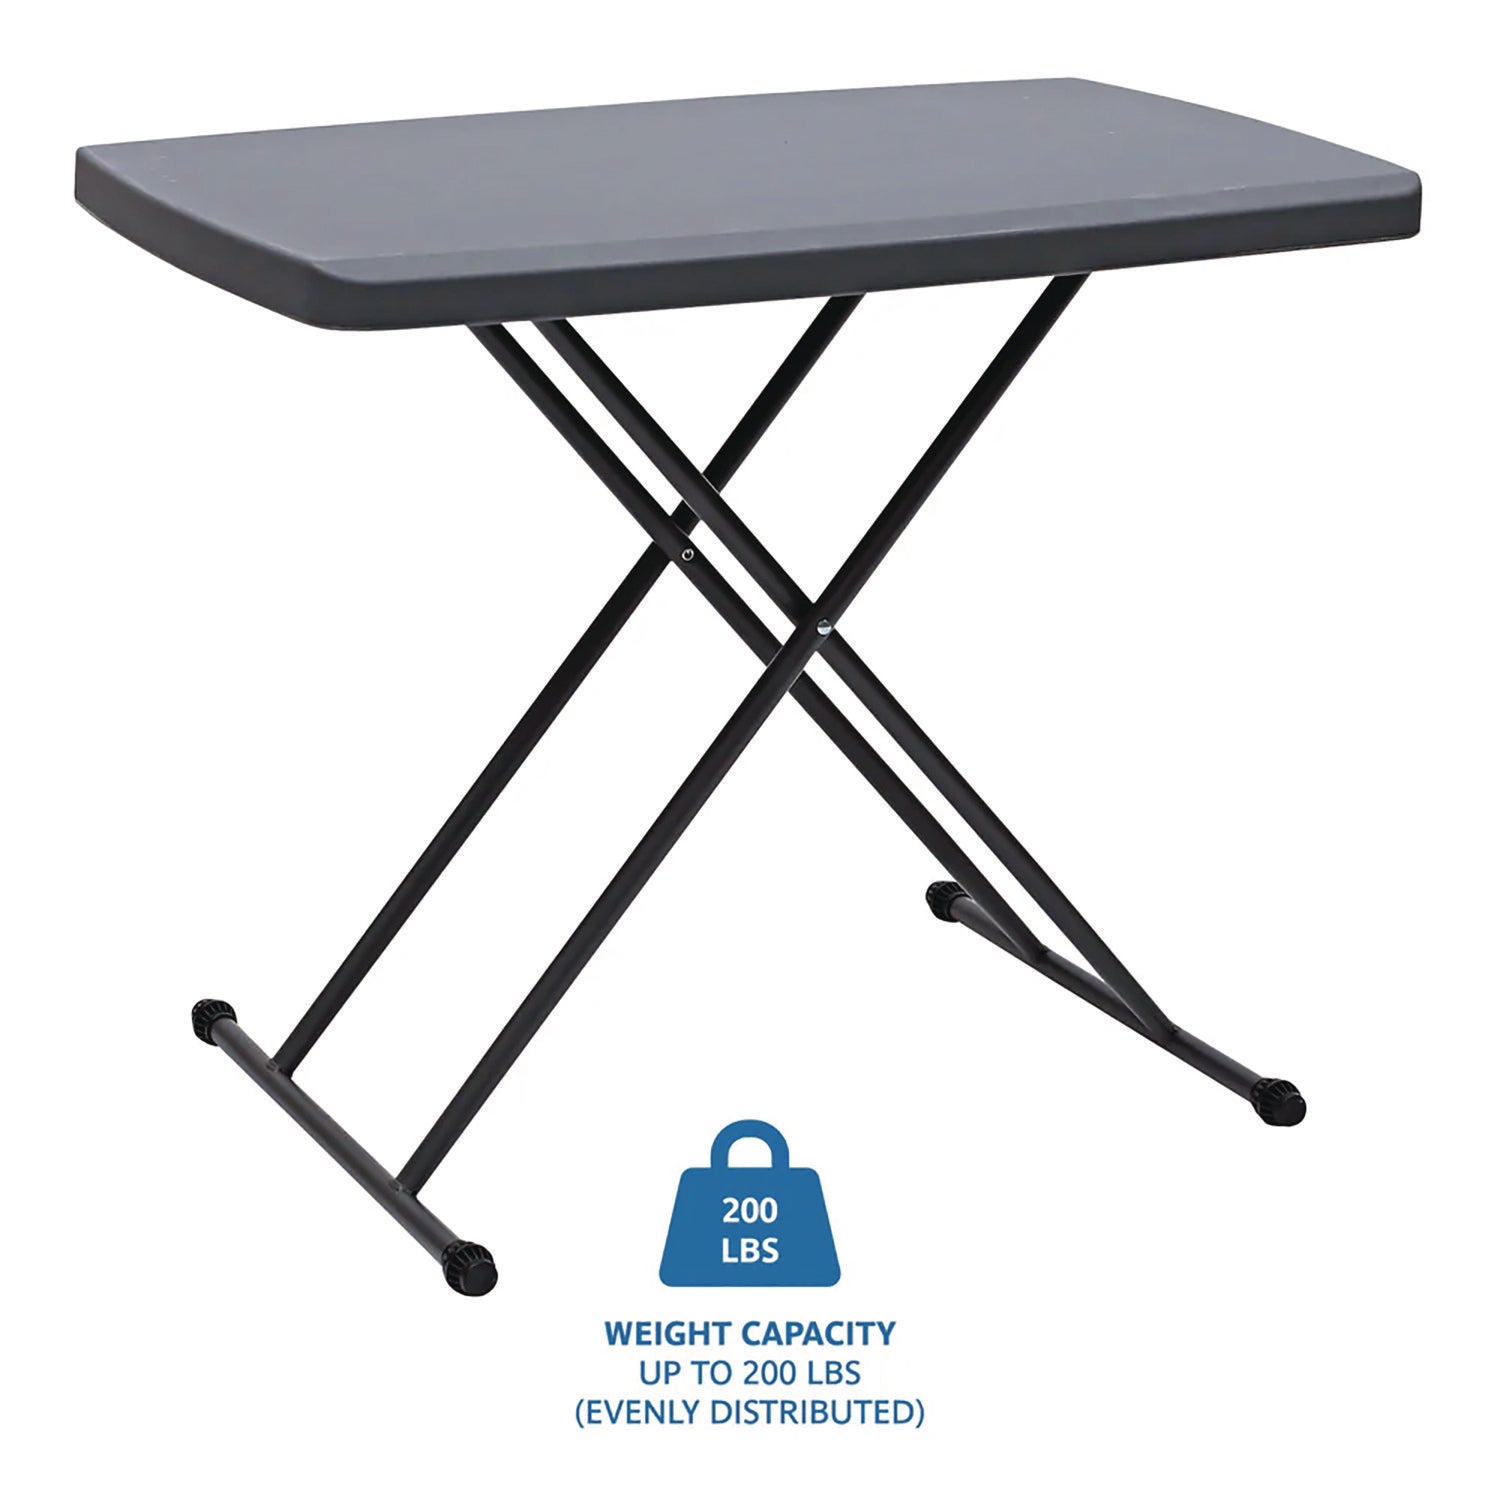 IndestrucTable Classic Personal Folding Table, 30" x 20" x 25" to 28", Charcoal - 4